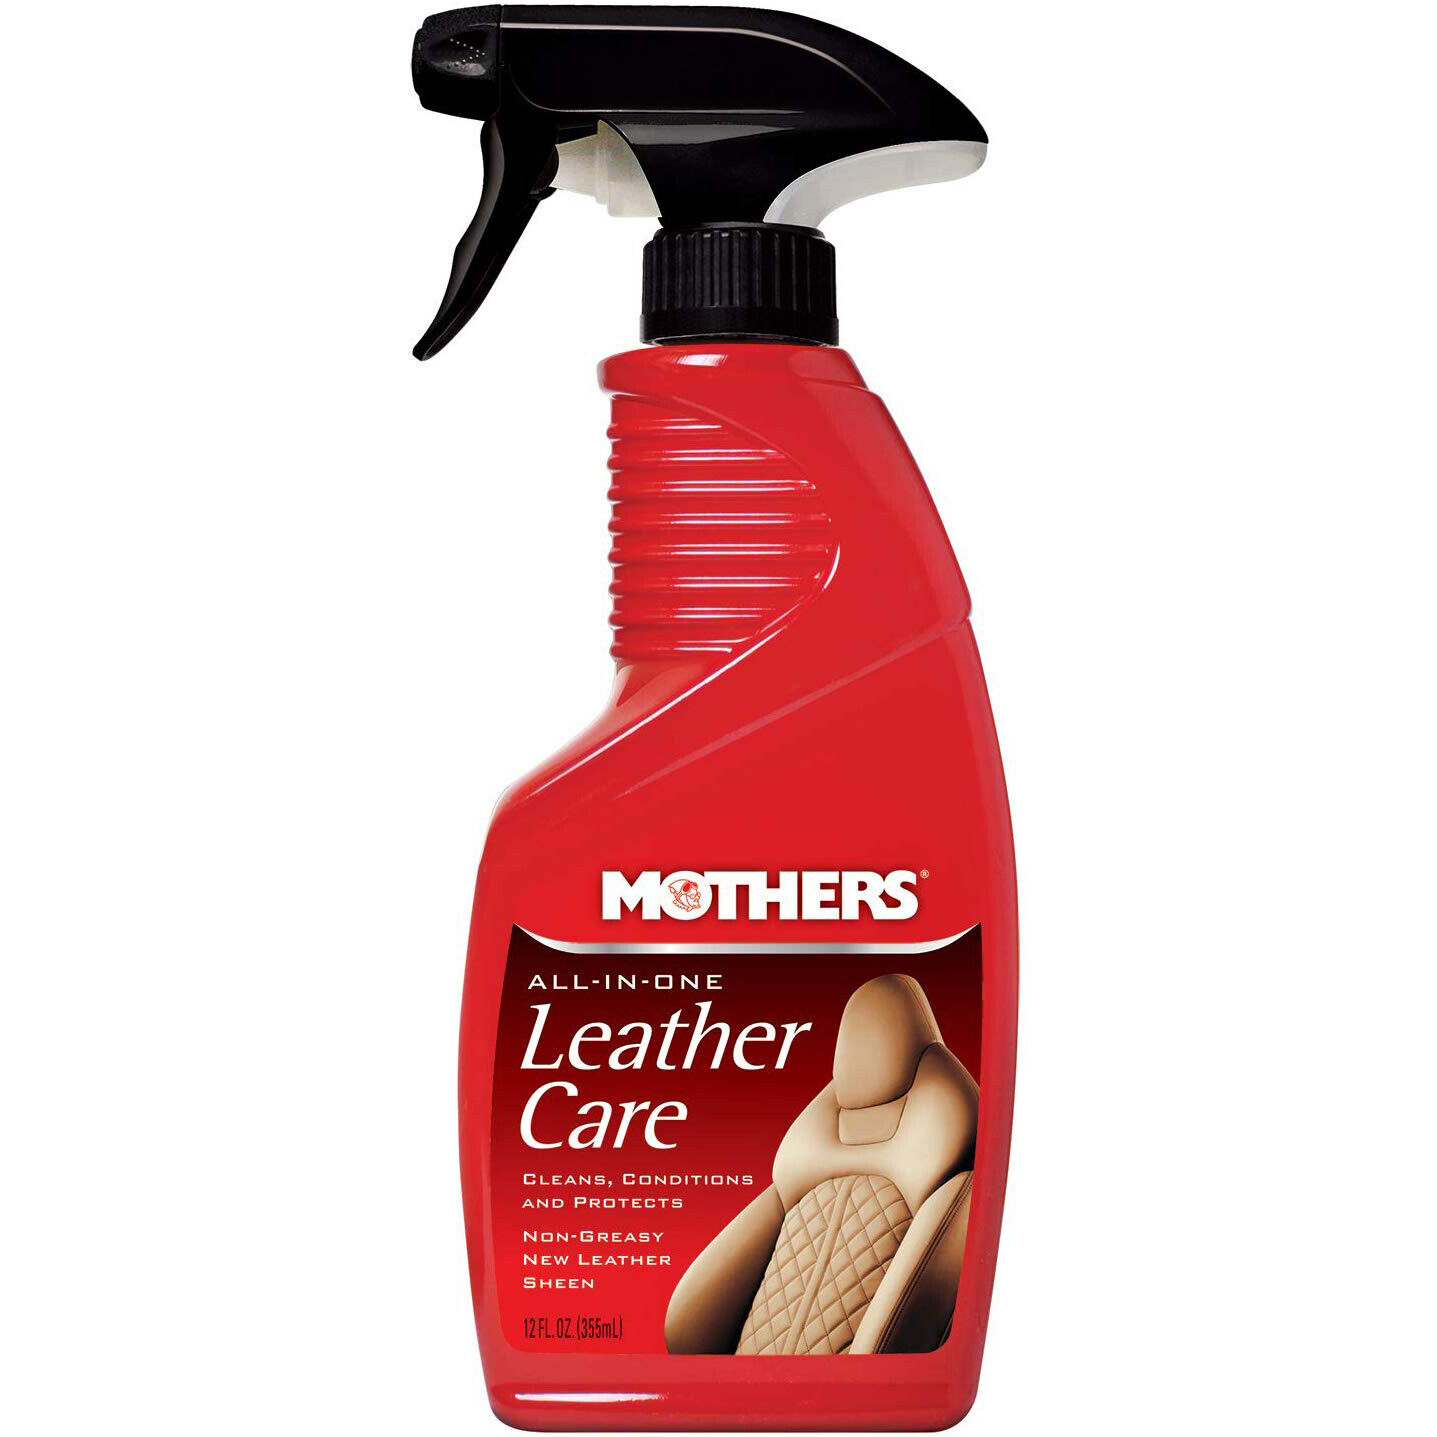 Mothers All-in-One Leather Care, Car Leather Care, 12 fl. oz.